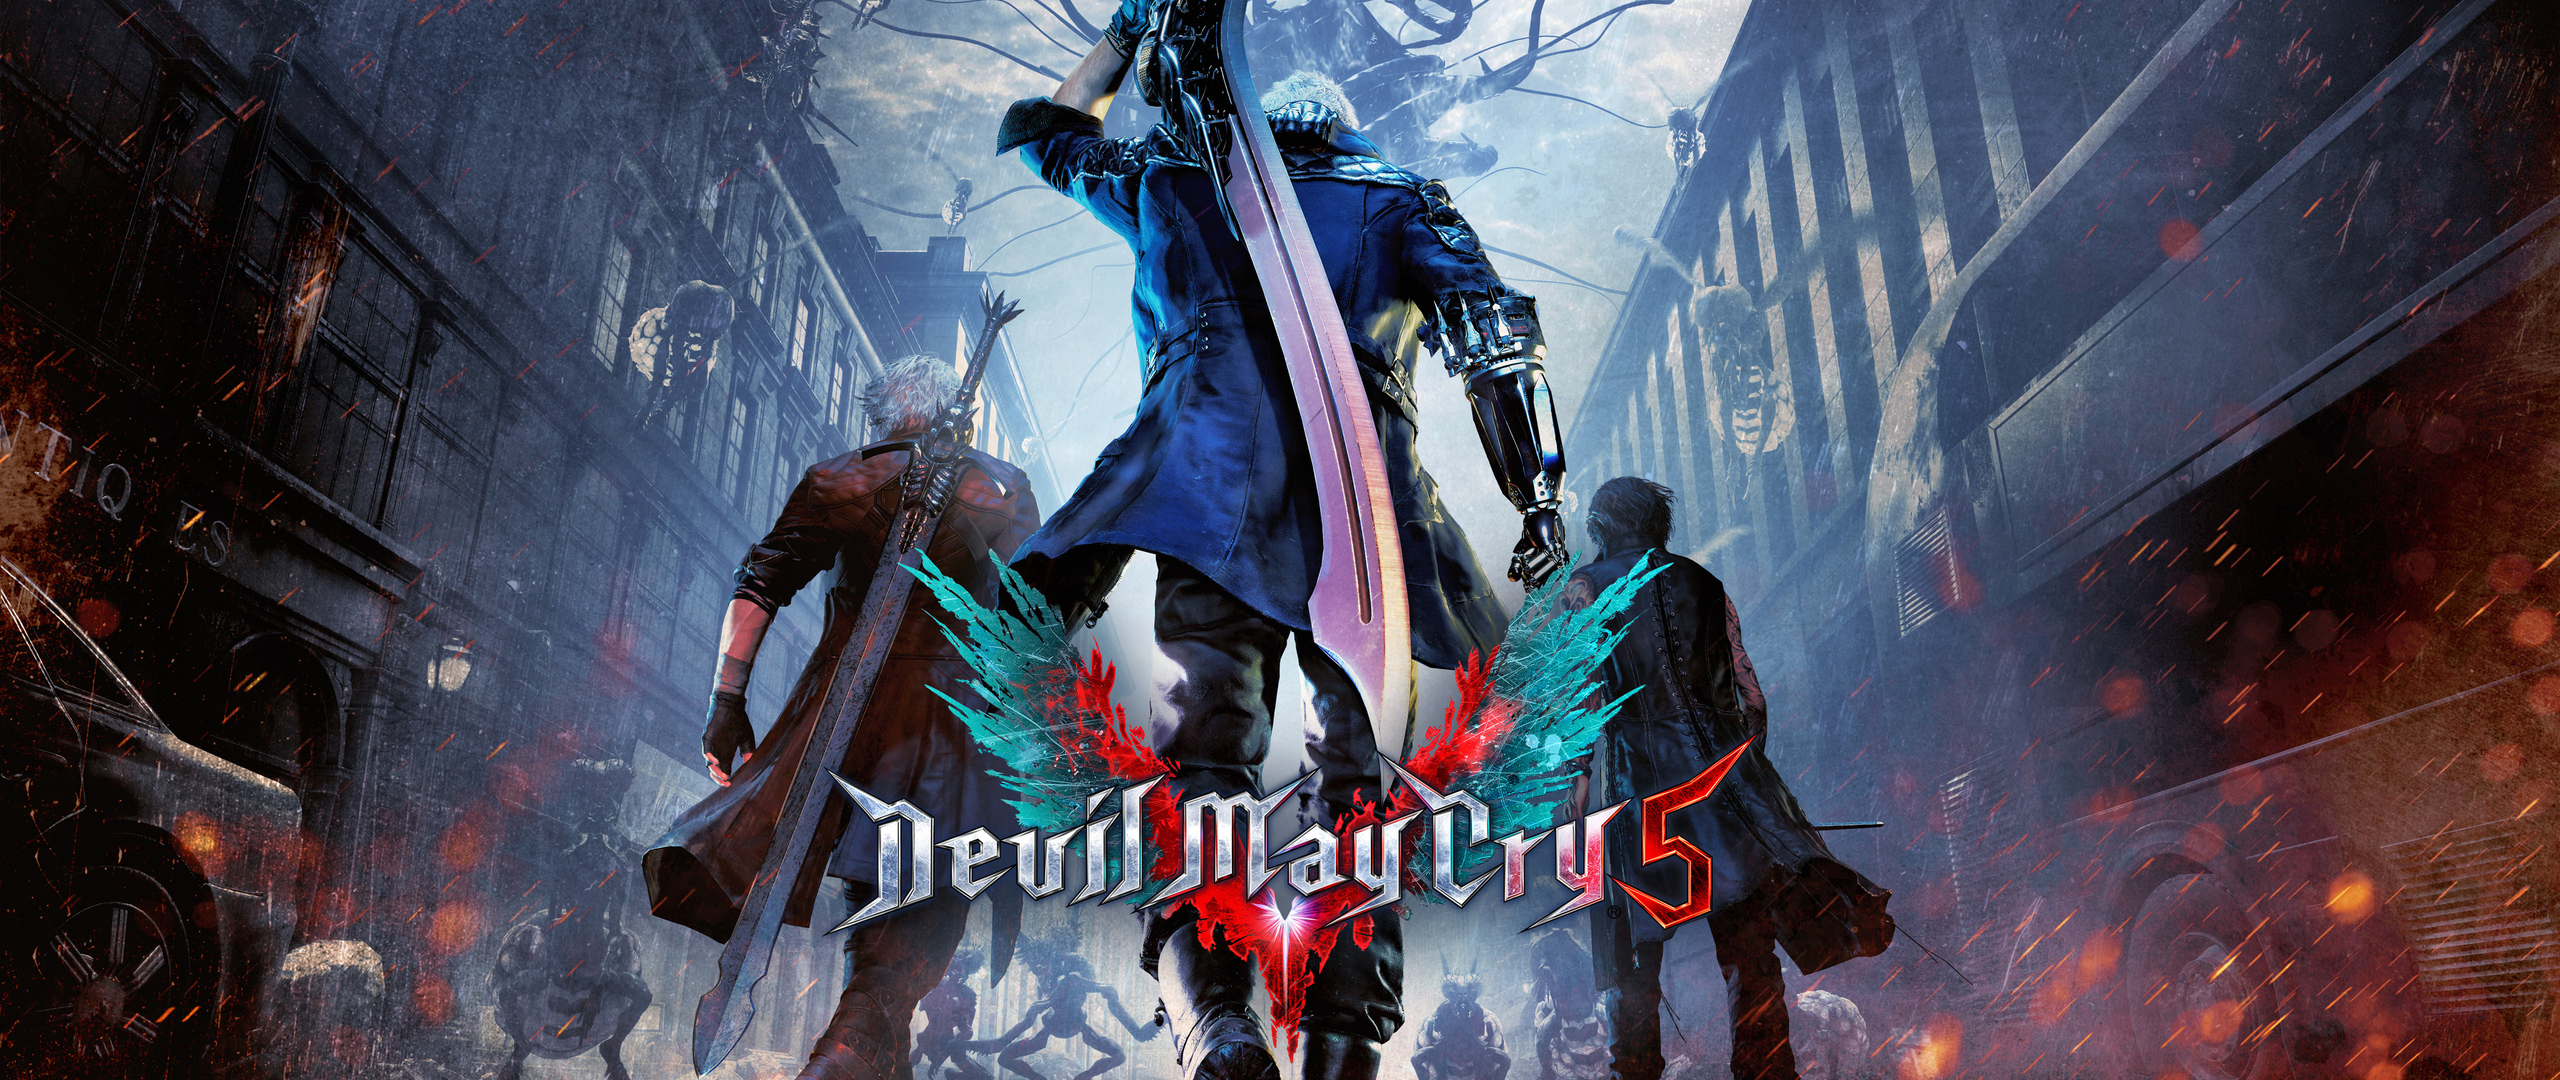 2560x1080 Devil May Cry 5 4k 2560x1080 Resolution Hd 4k Wallpapers Images Backgrounds Photos And Pictures